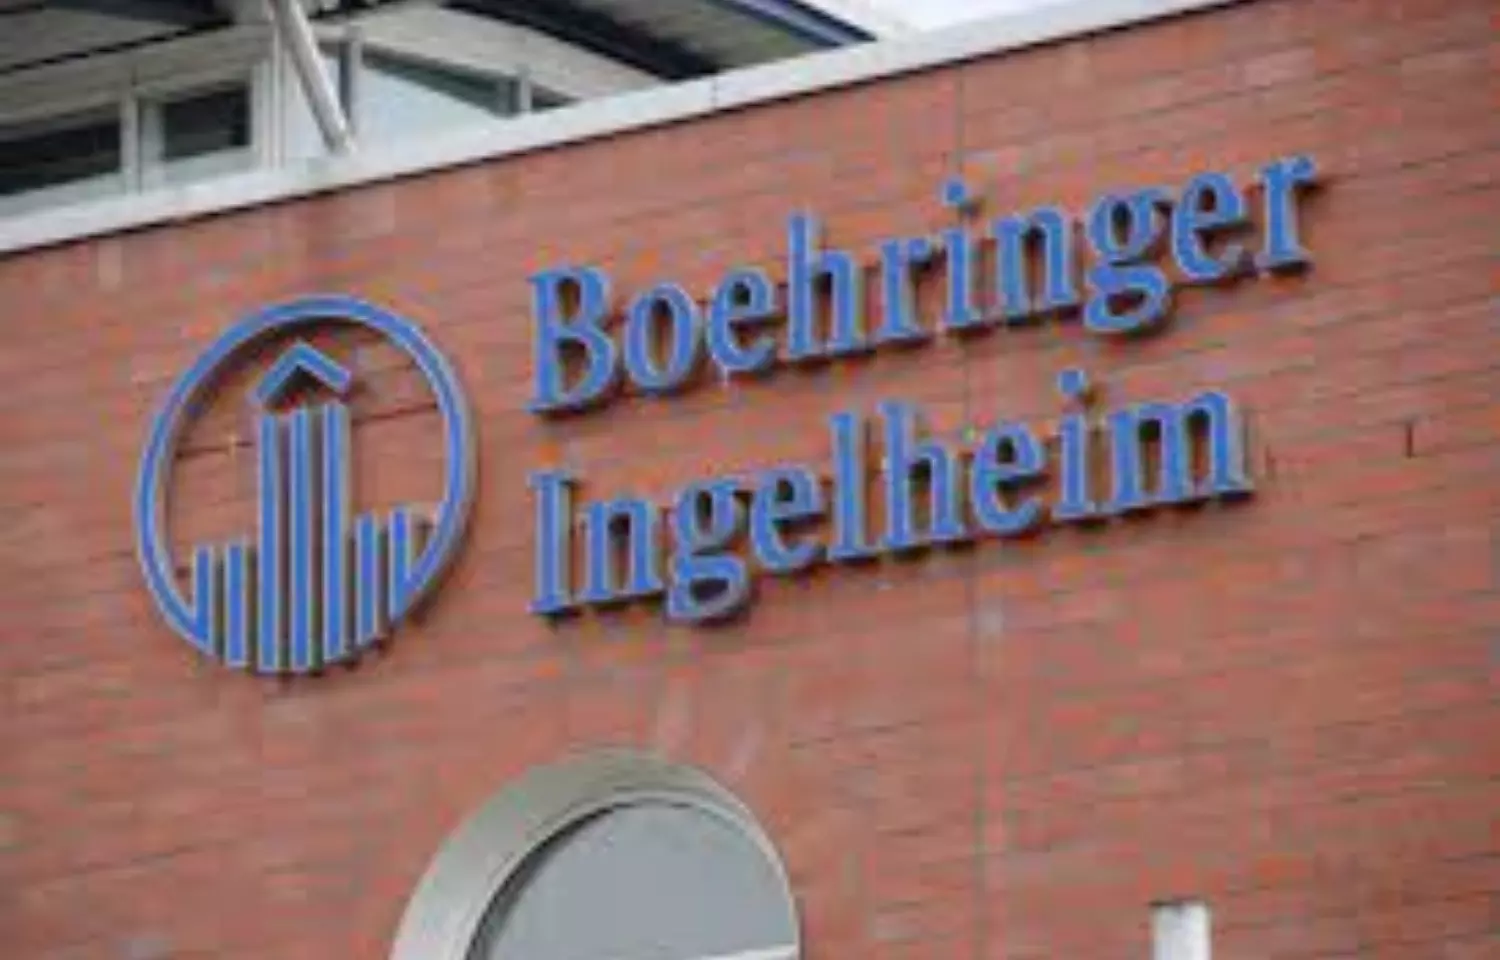 Boehringer Ingelheim, A*STAR ink pact for targeted cancer therapies